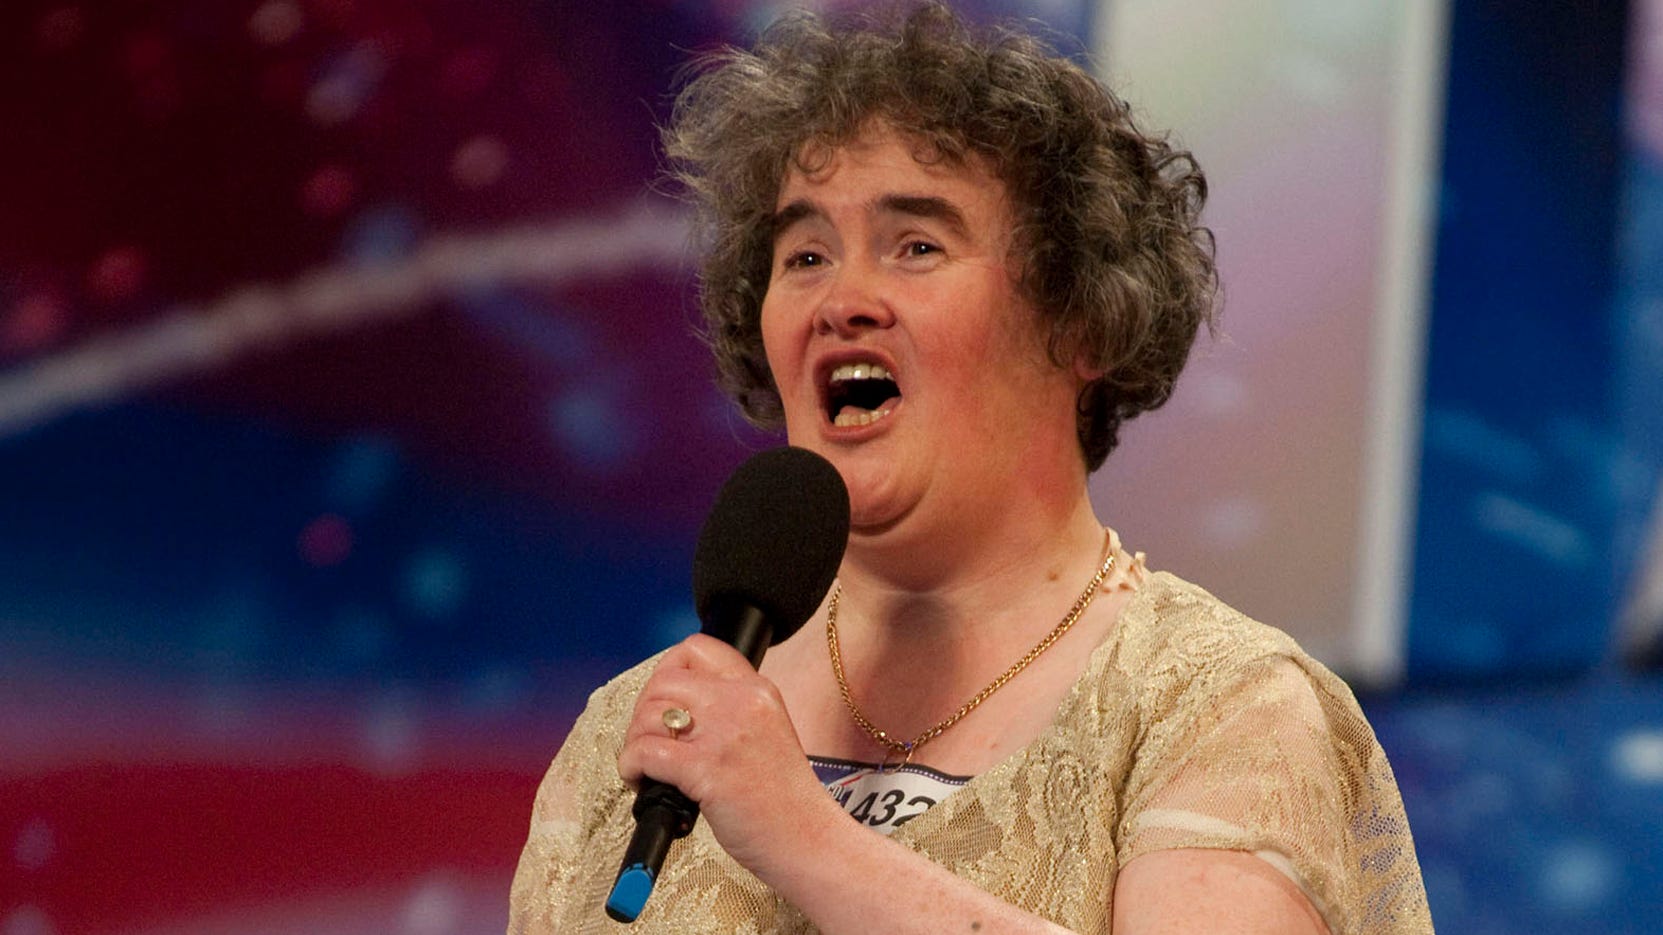 Odd Duck To Diva How Susan Boyle Became An Unlikely Star 10 Years Ago